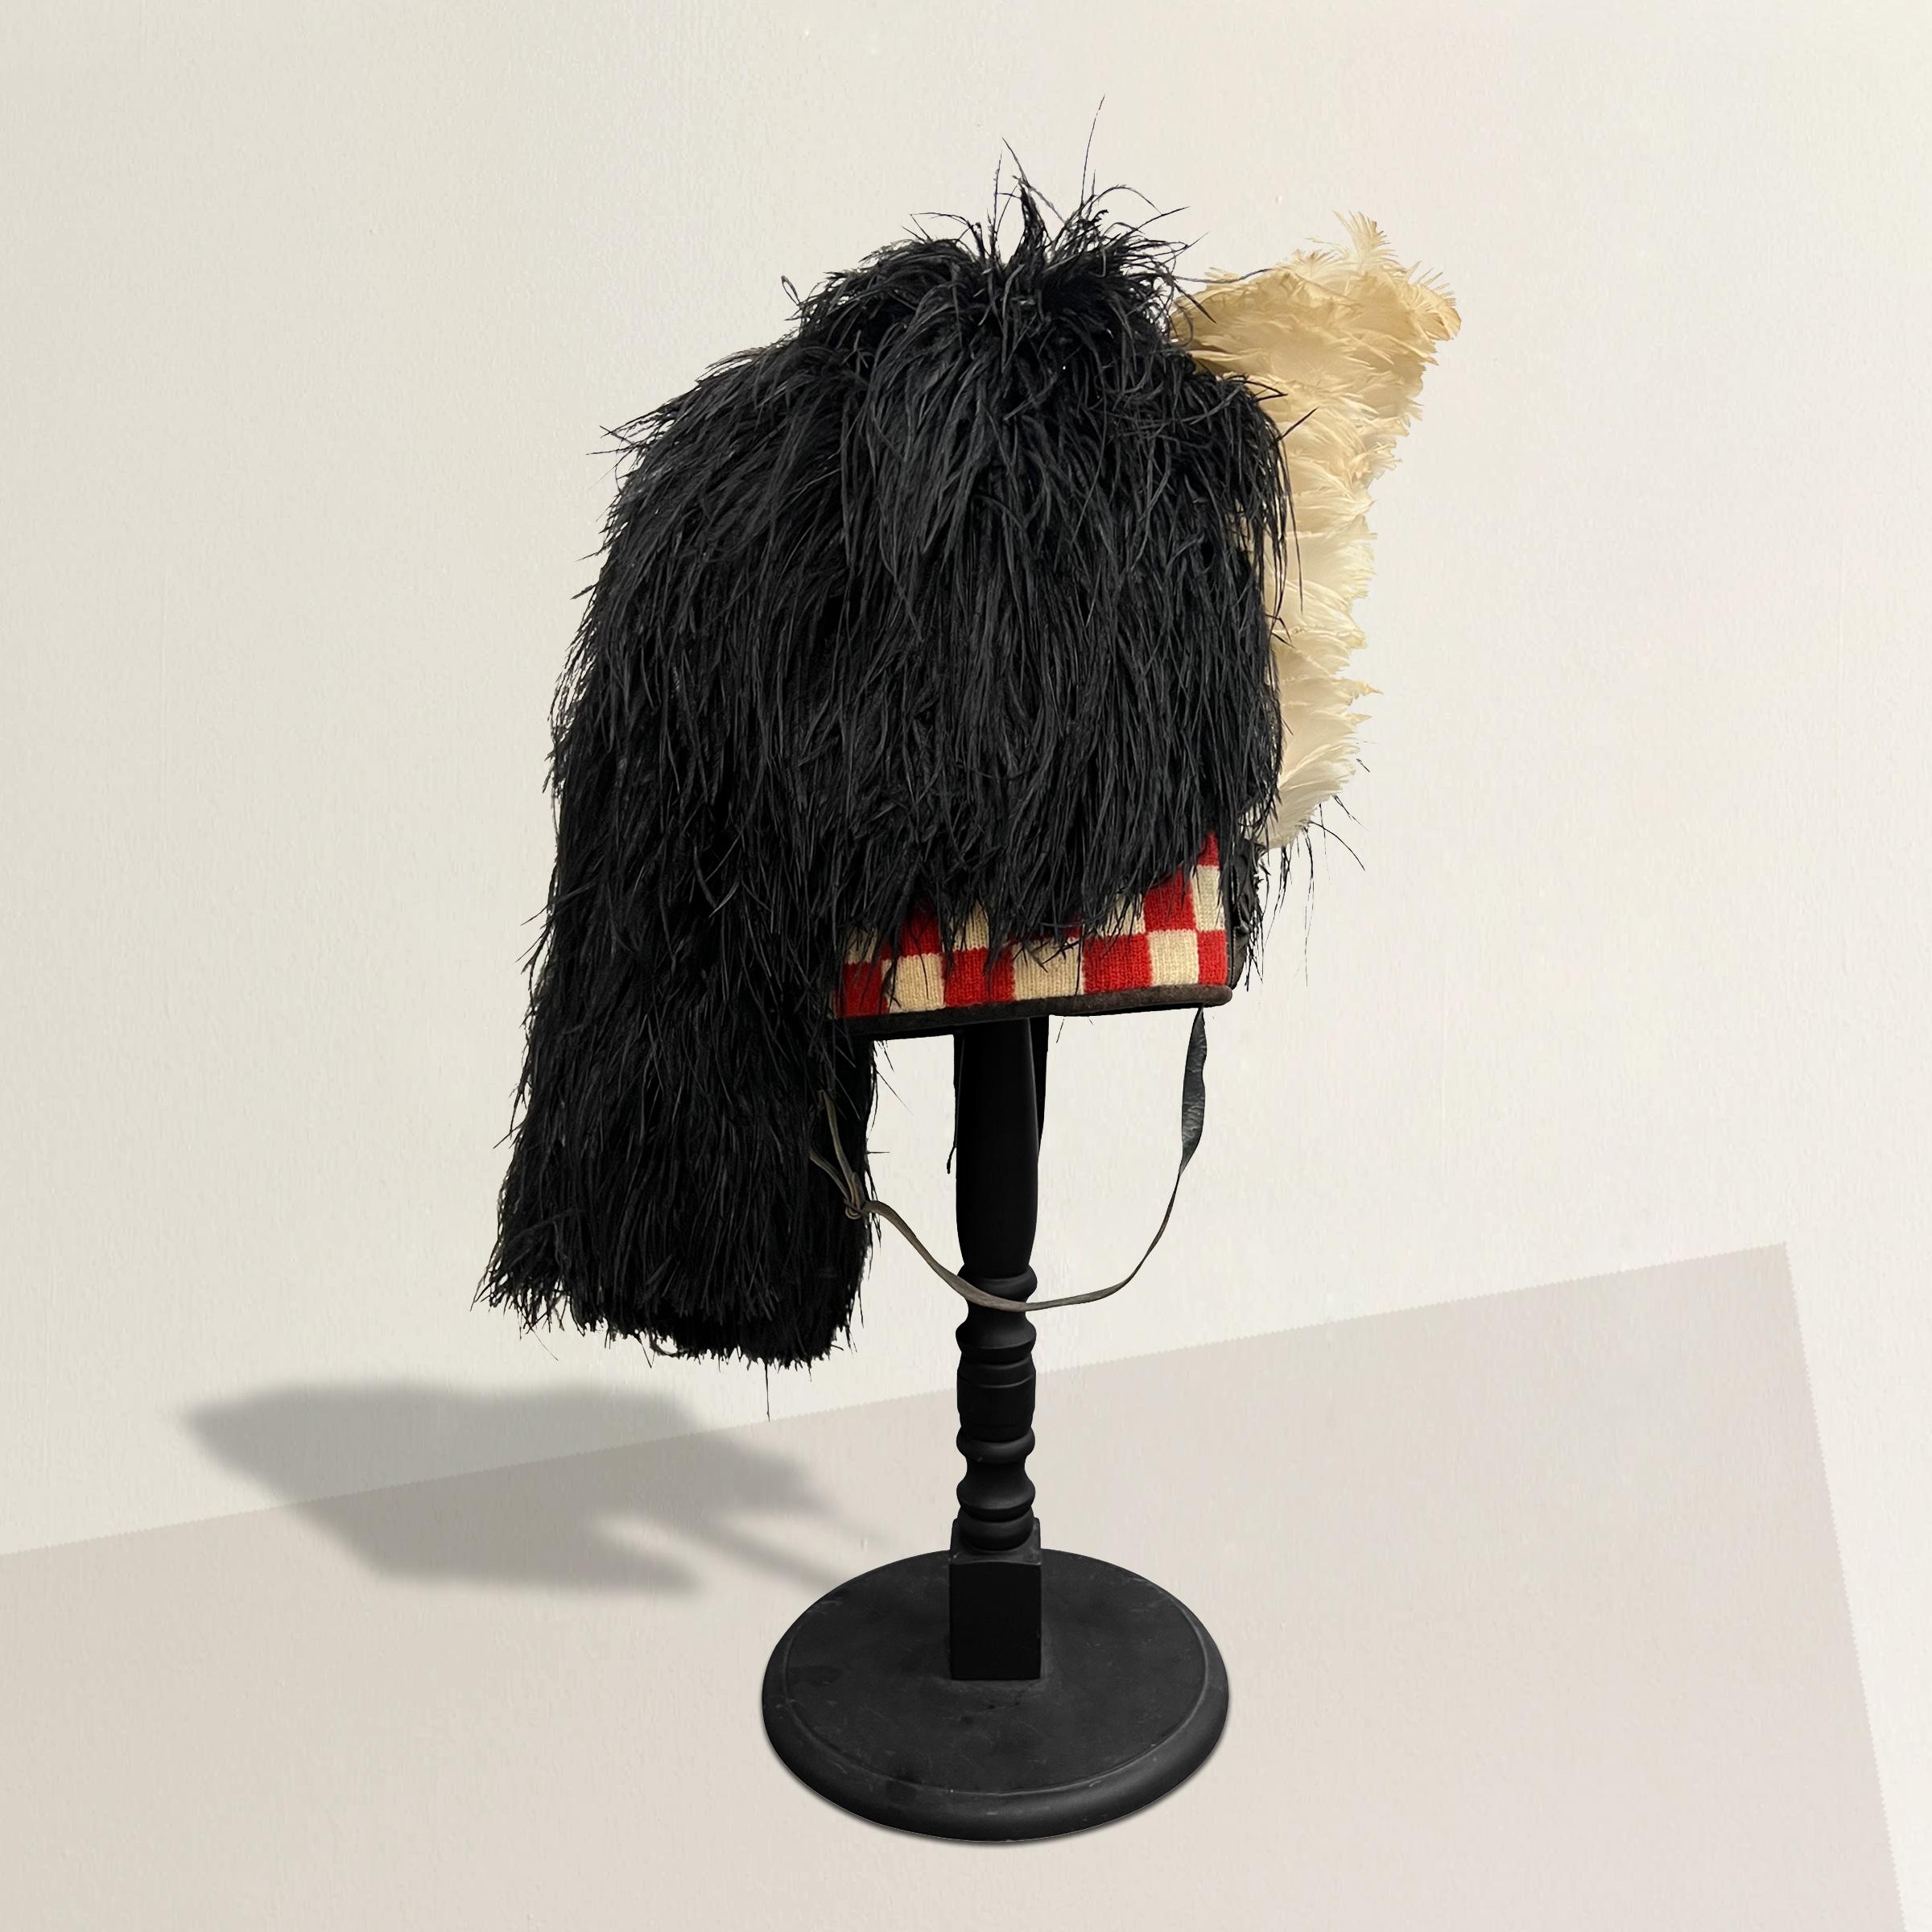 A playful yet strong early 20th century Scottish bagpiper's bonnet with a woven wool checkerboard headband and decorated with a large black ostrich feather plume and a white feather hackle, mounted on a turned wood stand.